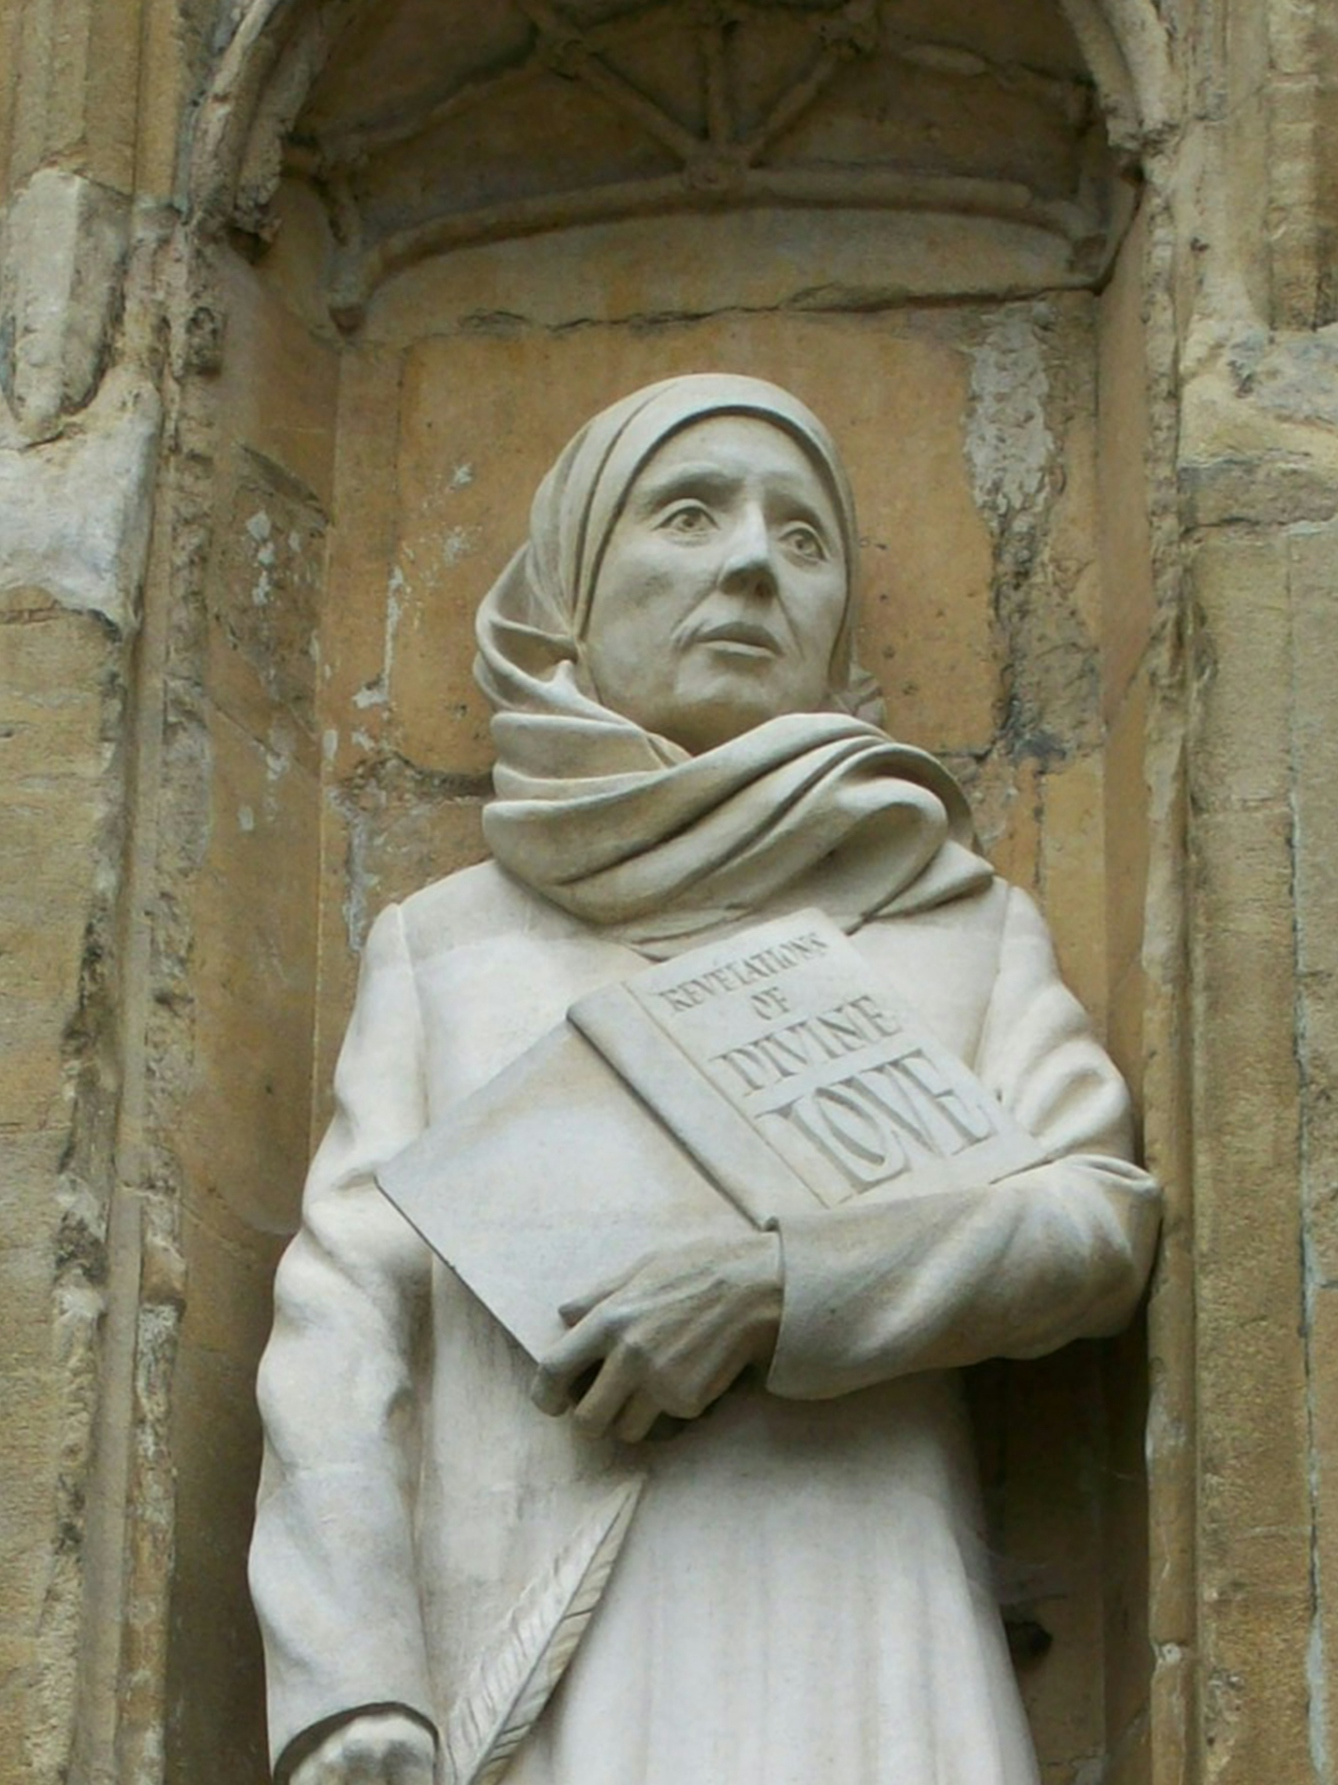 Photograph of white stone statue of Julian of Norwich. She is holding a book and the title reads 'Revelations of Divine Love'. The statue is ensconced in a stone alcove. 